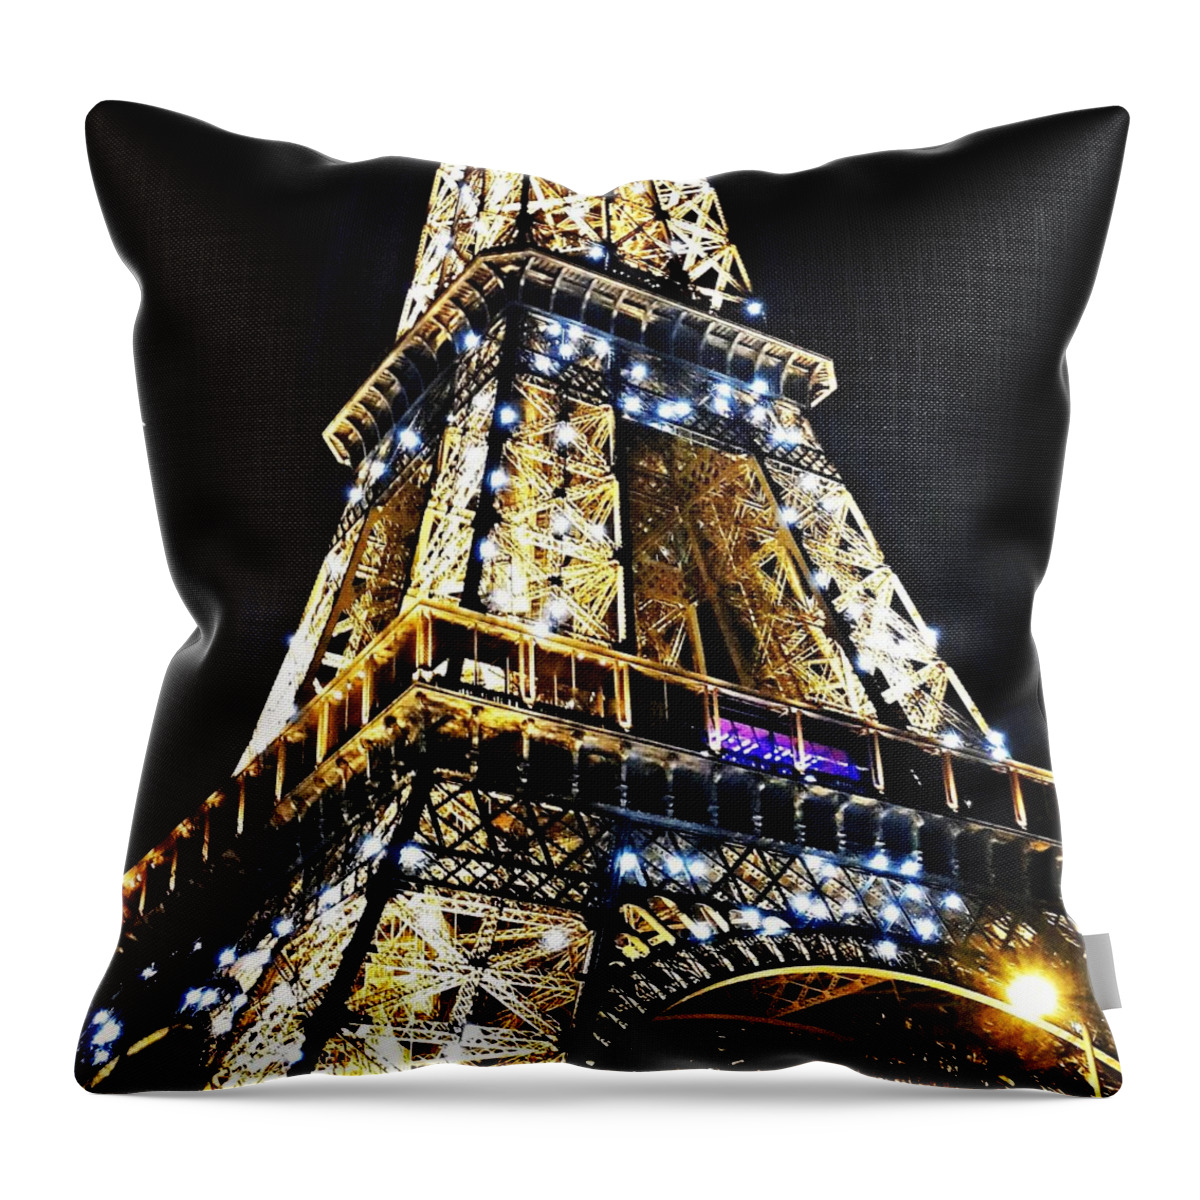  Throw Pillow featuring the photograph Paris - Eiffel Tower by Lush Life Travel